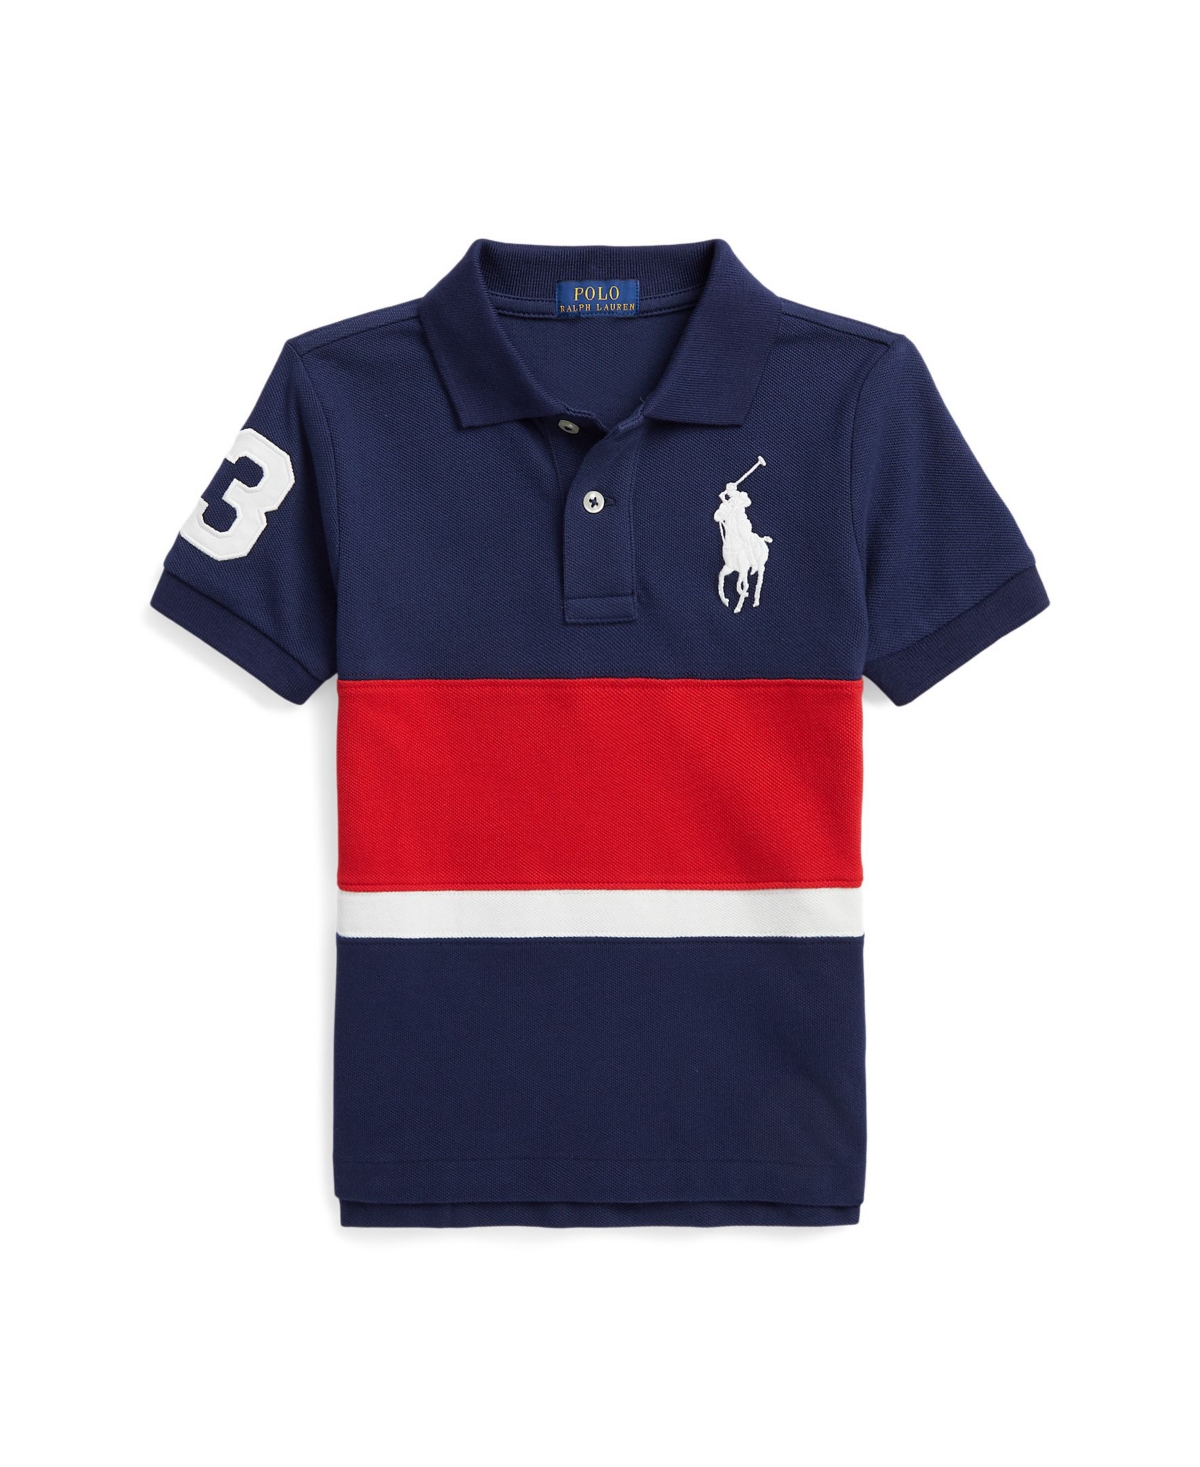 Polo Ralph Lauren Kids' Little And Toddler Boys Big Pony Cotton Mesh Polo Shirt In Newport Navy Multi